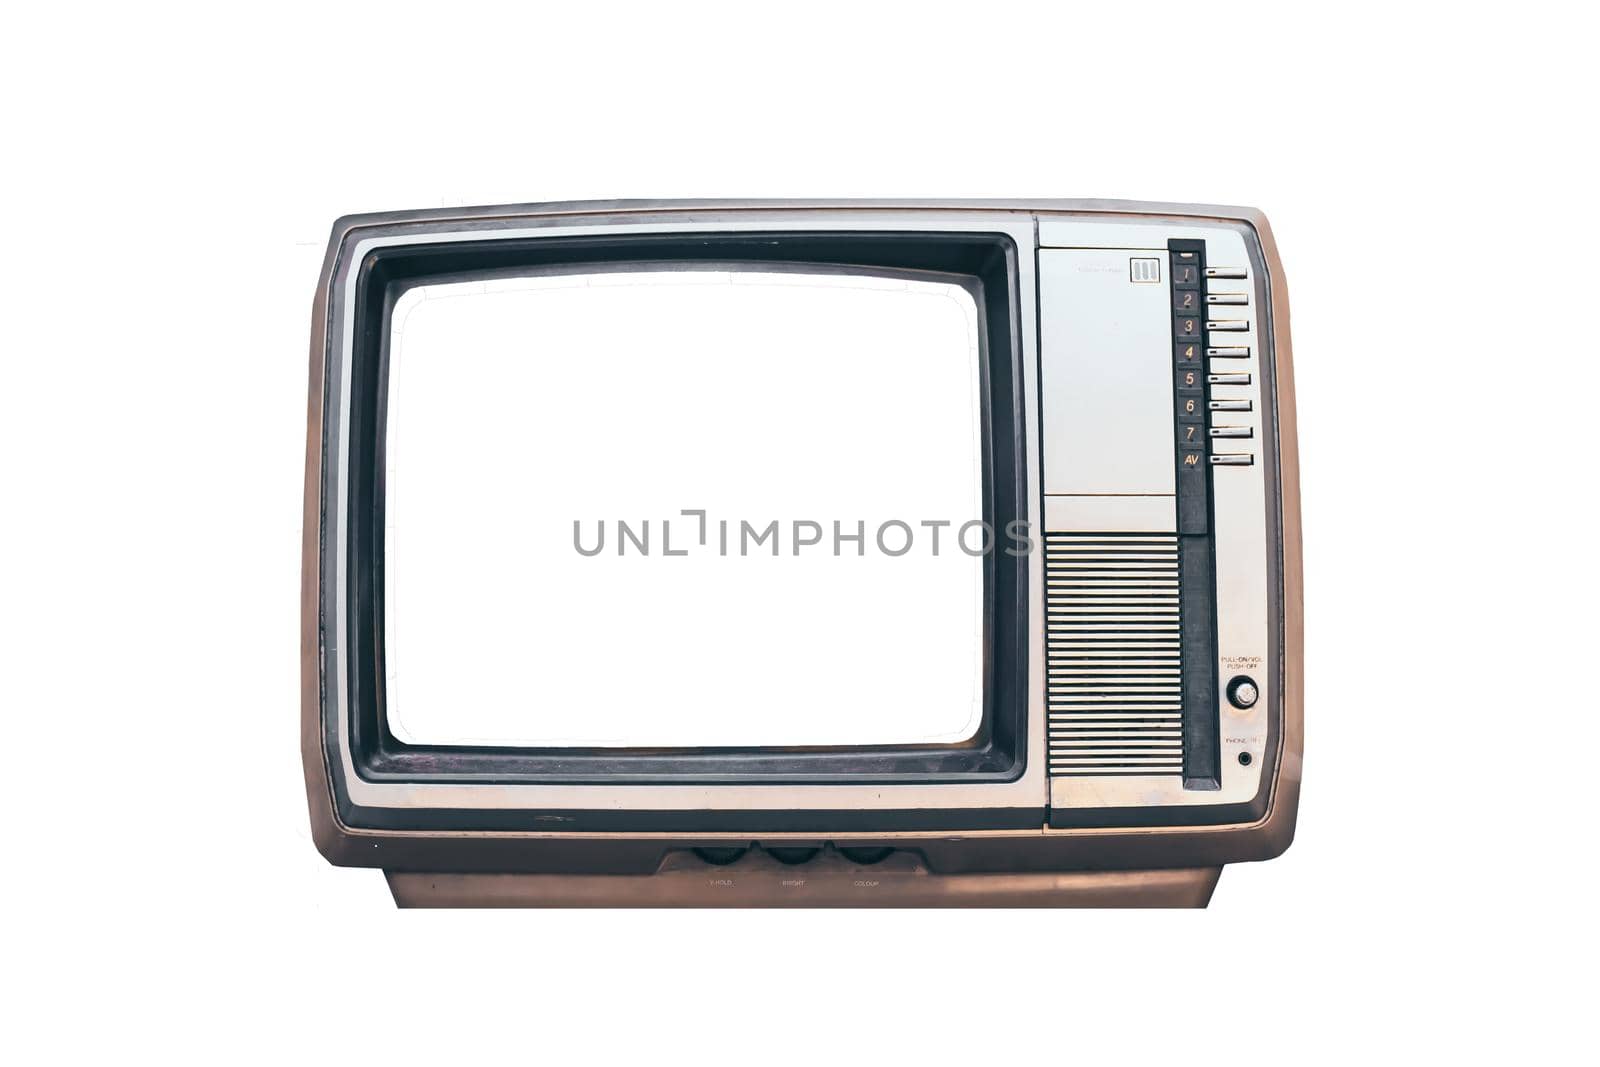 realistic retro television mock up .copy space .photo space isolate white background by Petrichor